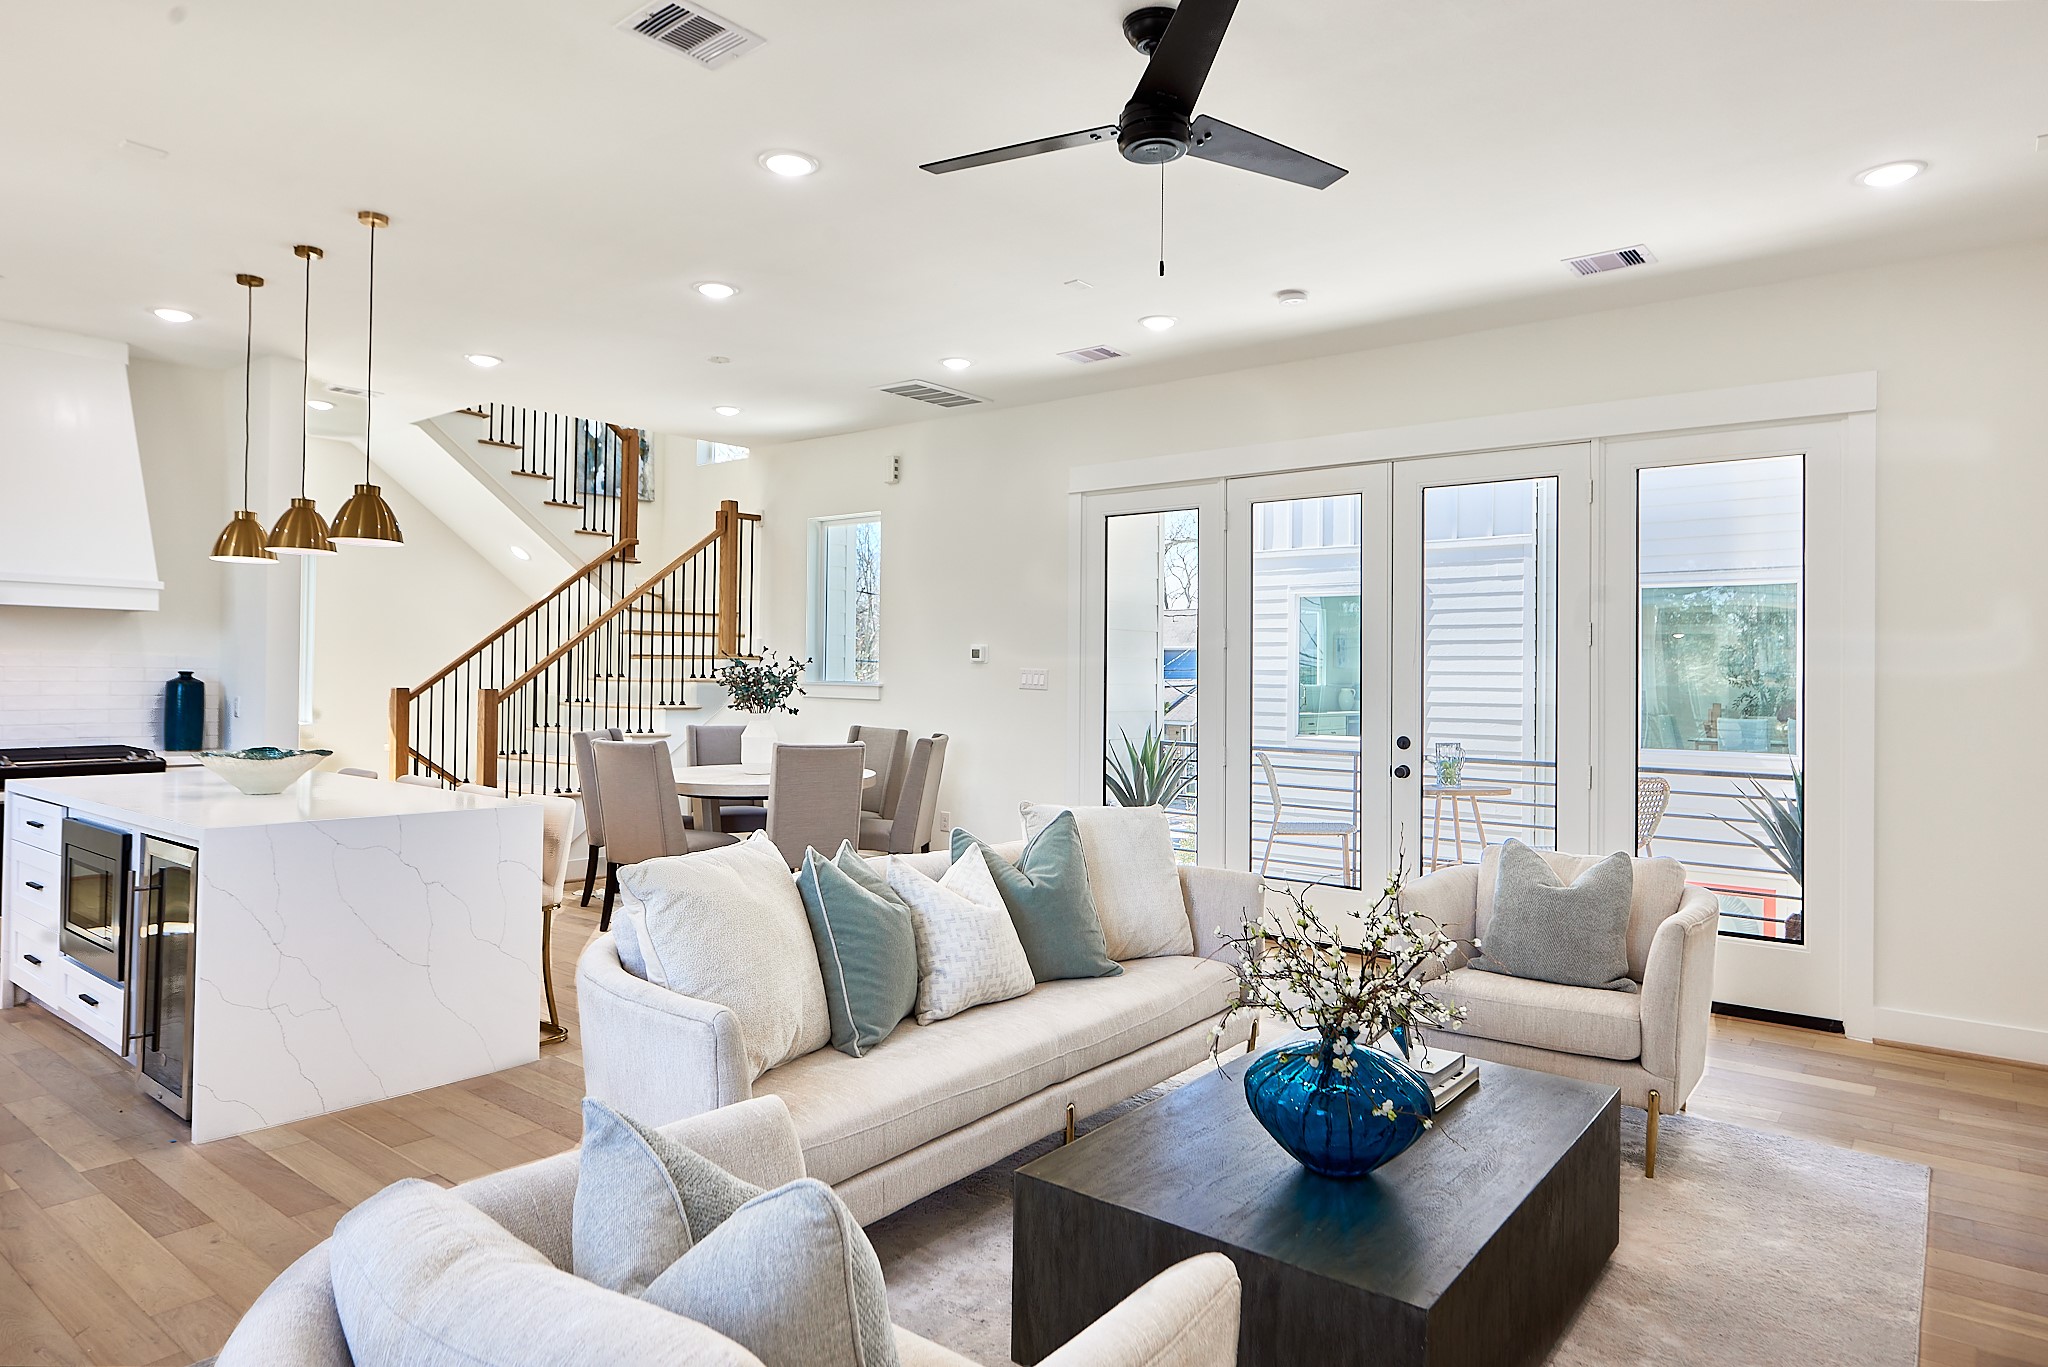 All pics. are of the staged model home
10 foot ceilings, Open concept designed second floor living with balcony roomy enough for a breakfast coffee or an evening nightcap.